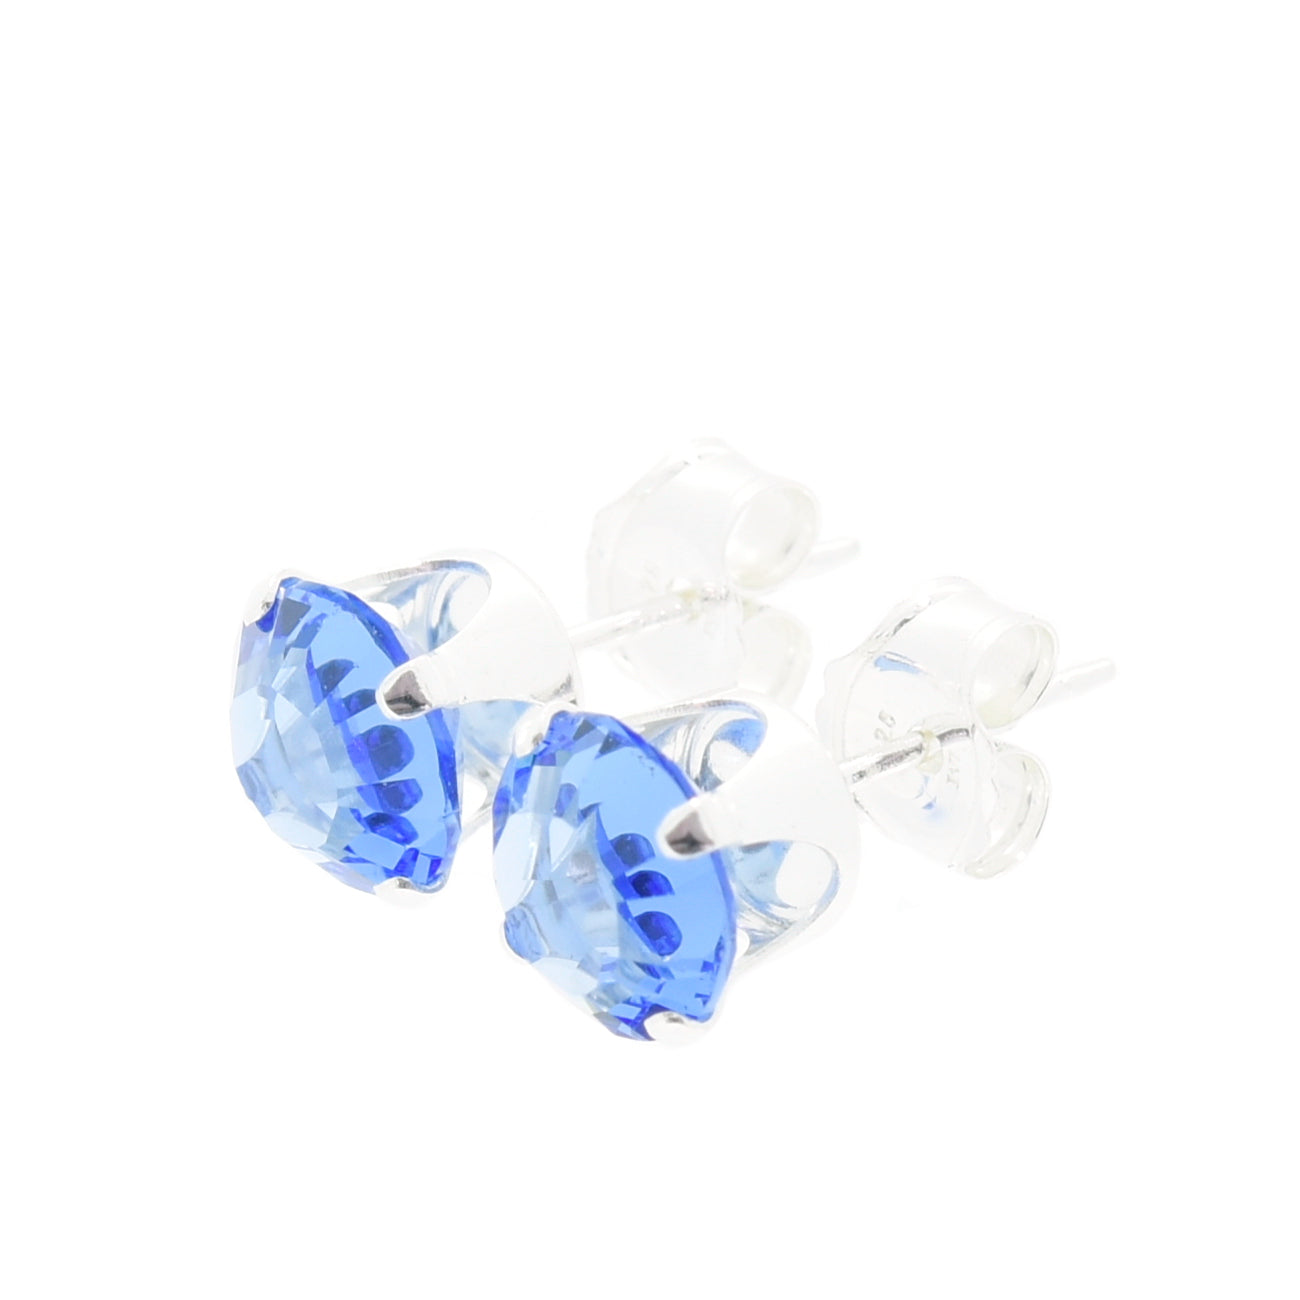 pewterhooter® Women's Classic Collection 925 Sterling silver earrings with sparkling Sapphire Blue channel crystals, packaged in a gift box for any occasion.